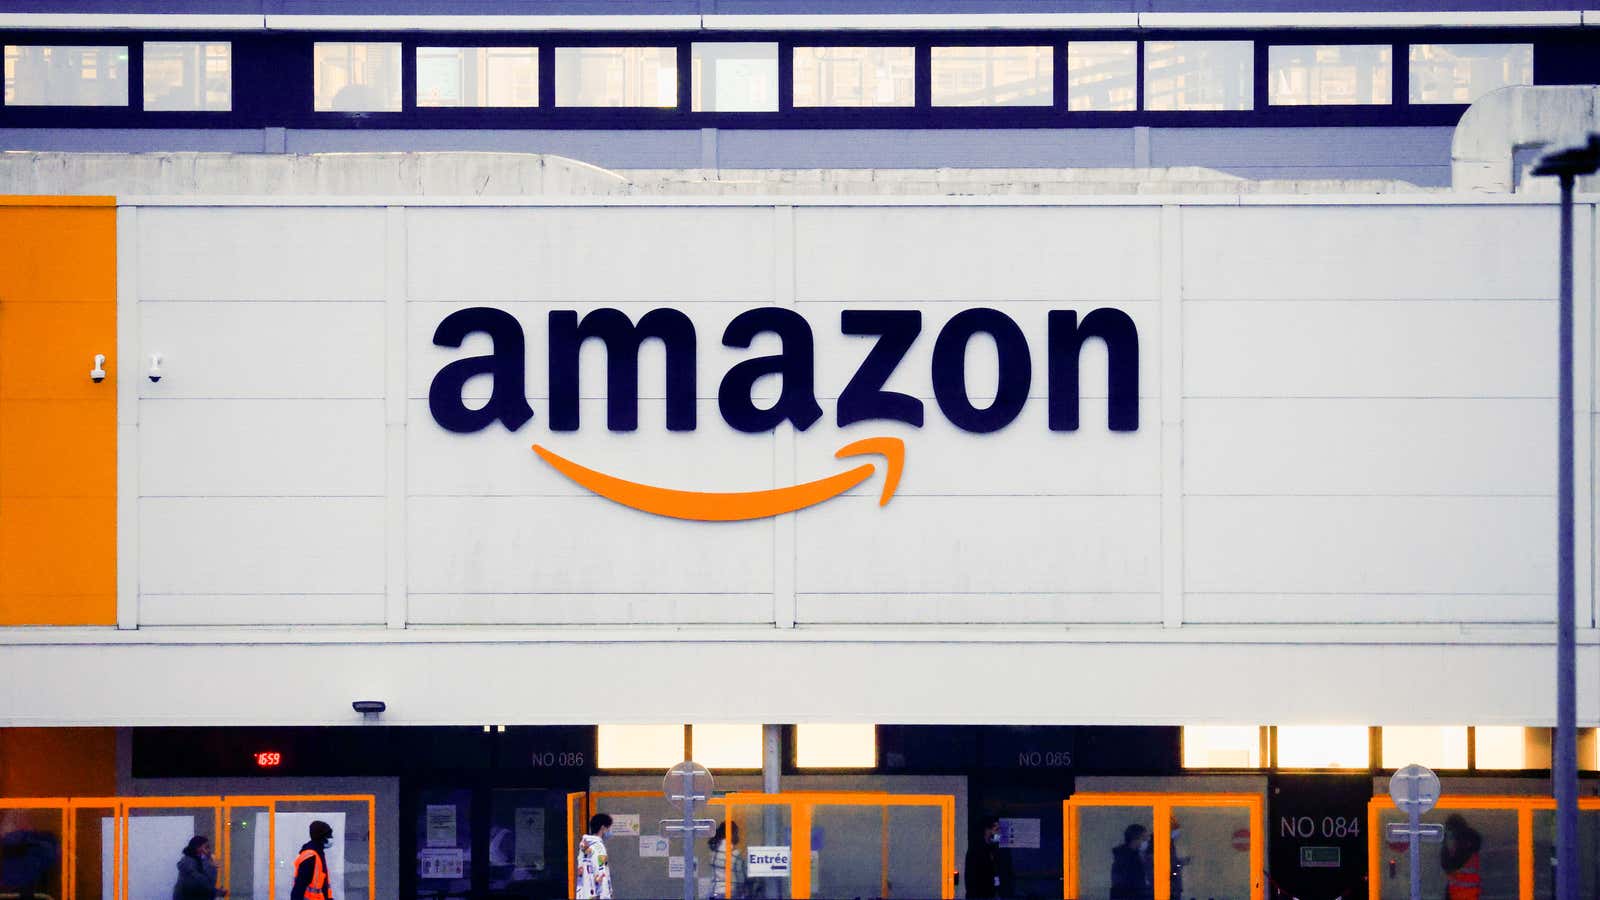 Image for Amazon stock is up as its AI platform stands to challenge Google and Microsoft's